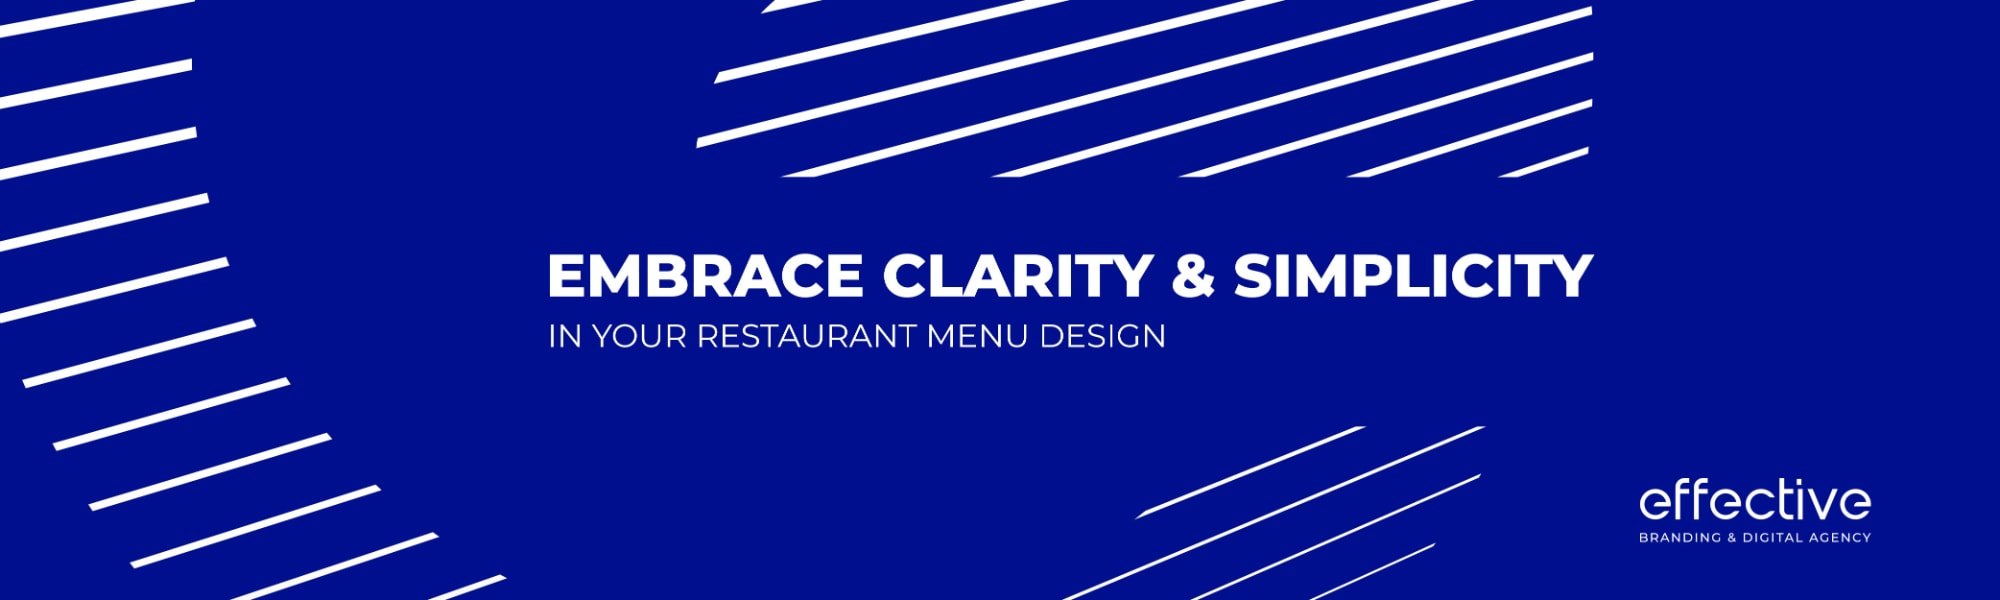 Embrace Clarity and Simplicity in Your Restaurant Menu Design